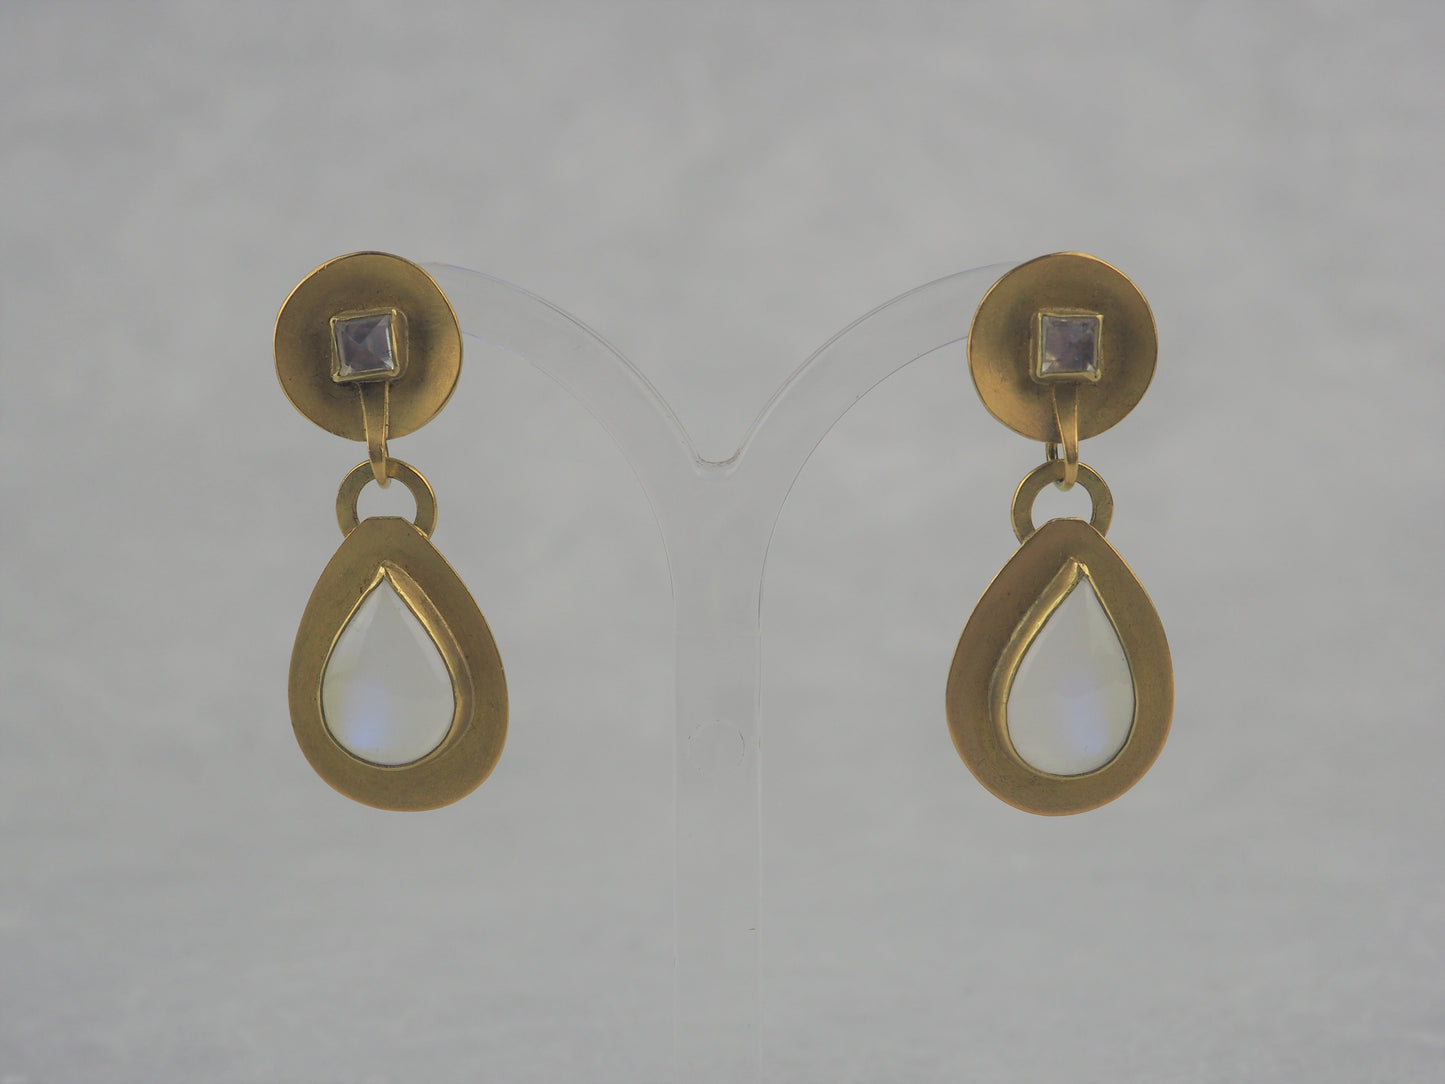 Krinos, Daphne – Gold and Moonstone Earrings